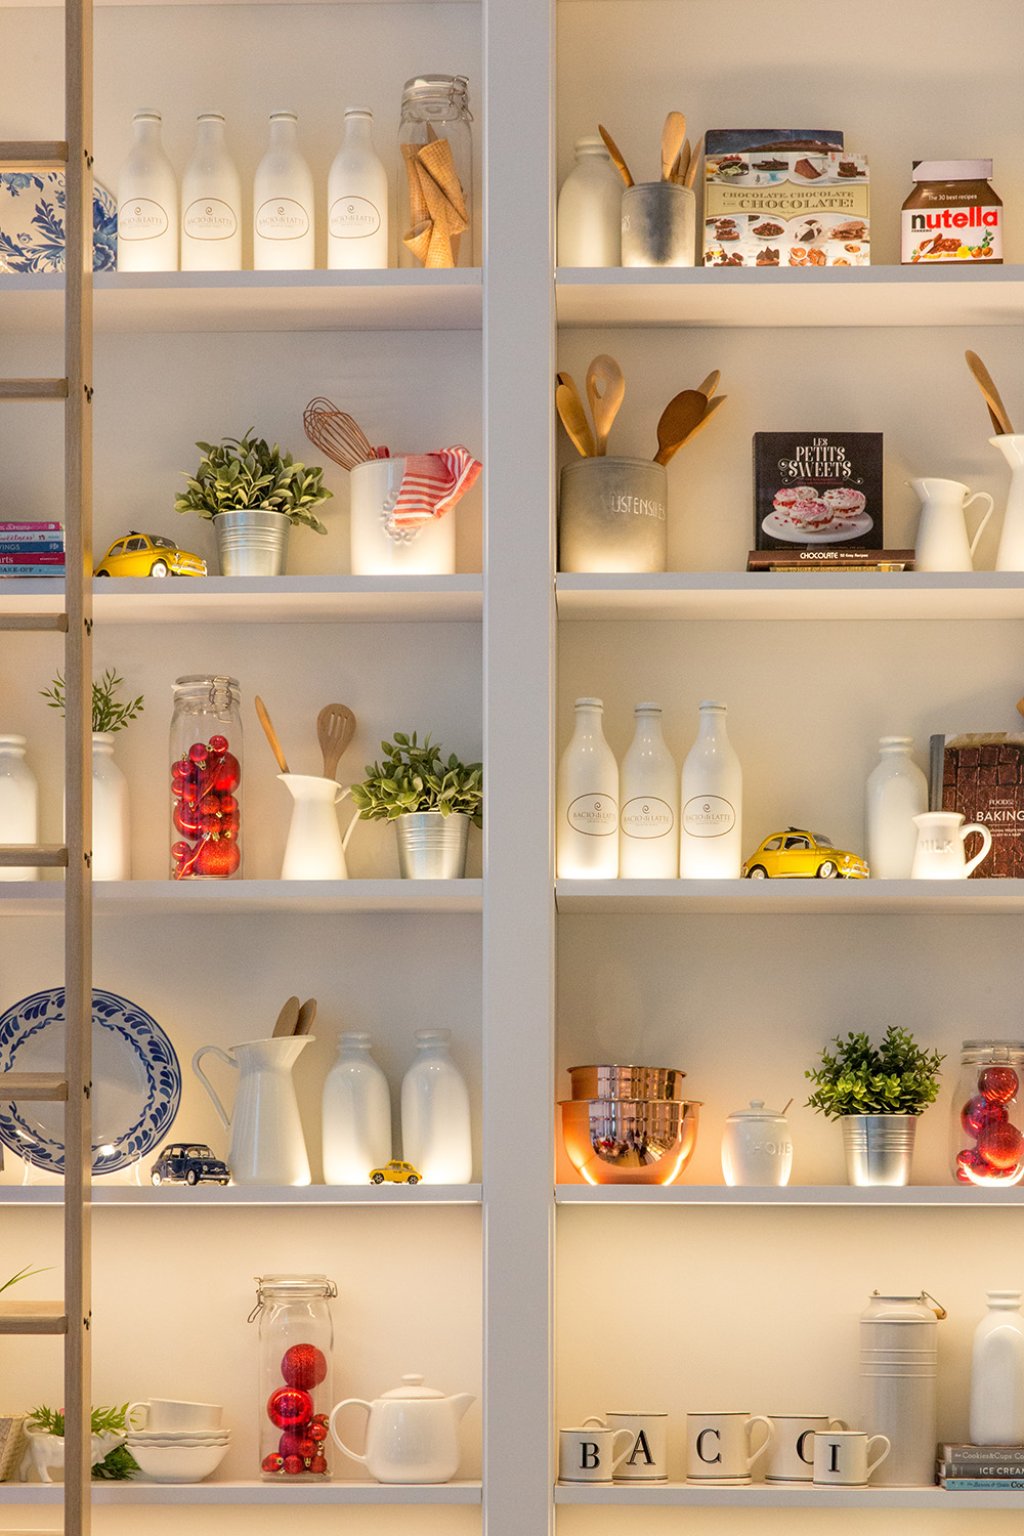 A photograph of a set of neatly arranged kitchen shelves displaying packages of food, bottles, utinsils, plates and small model cars.